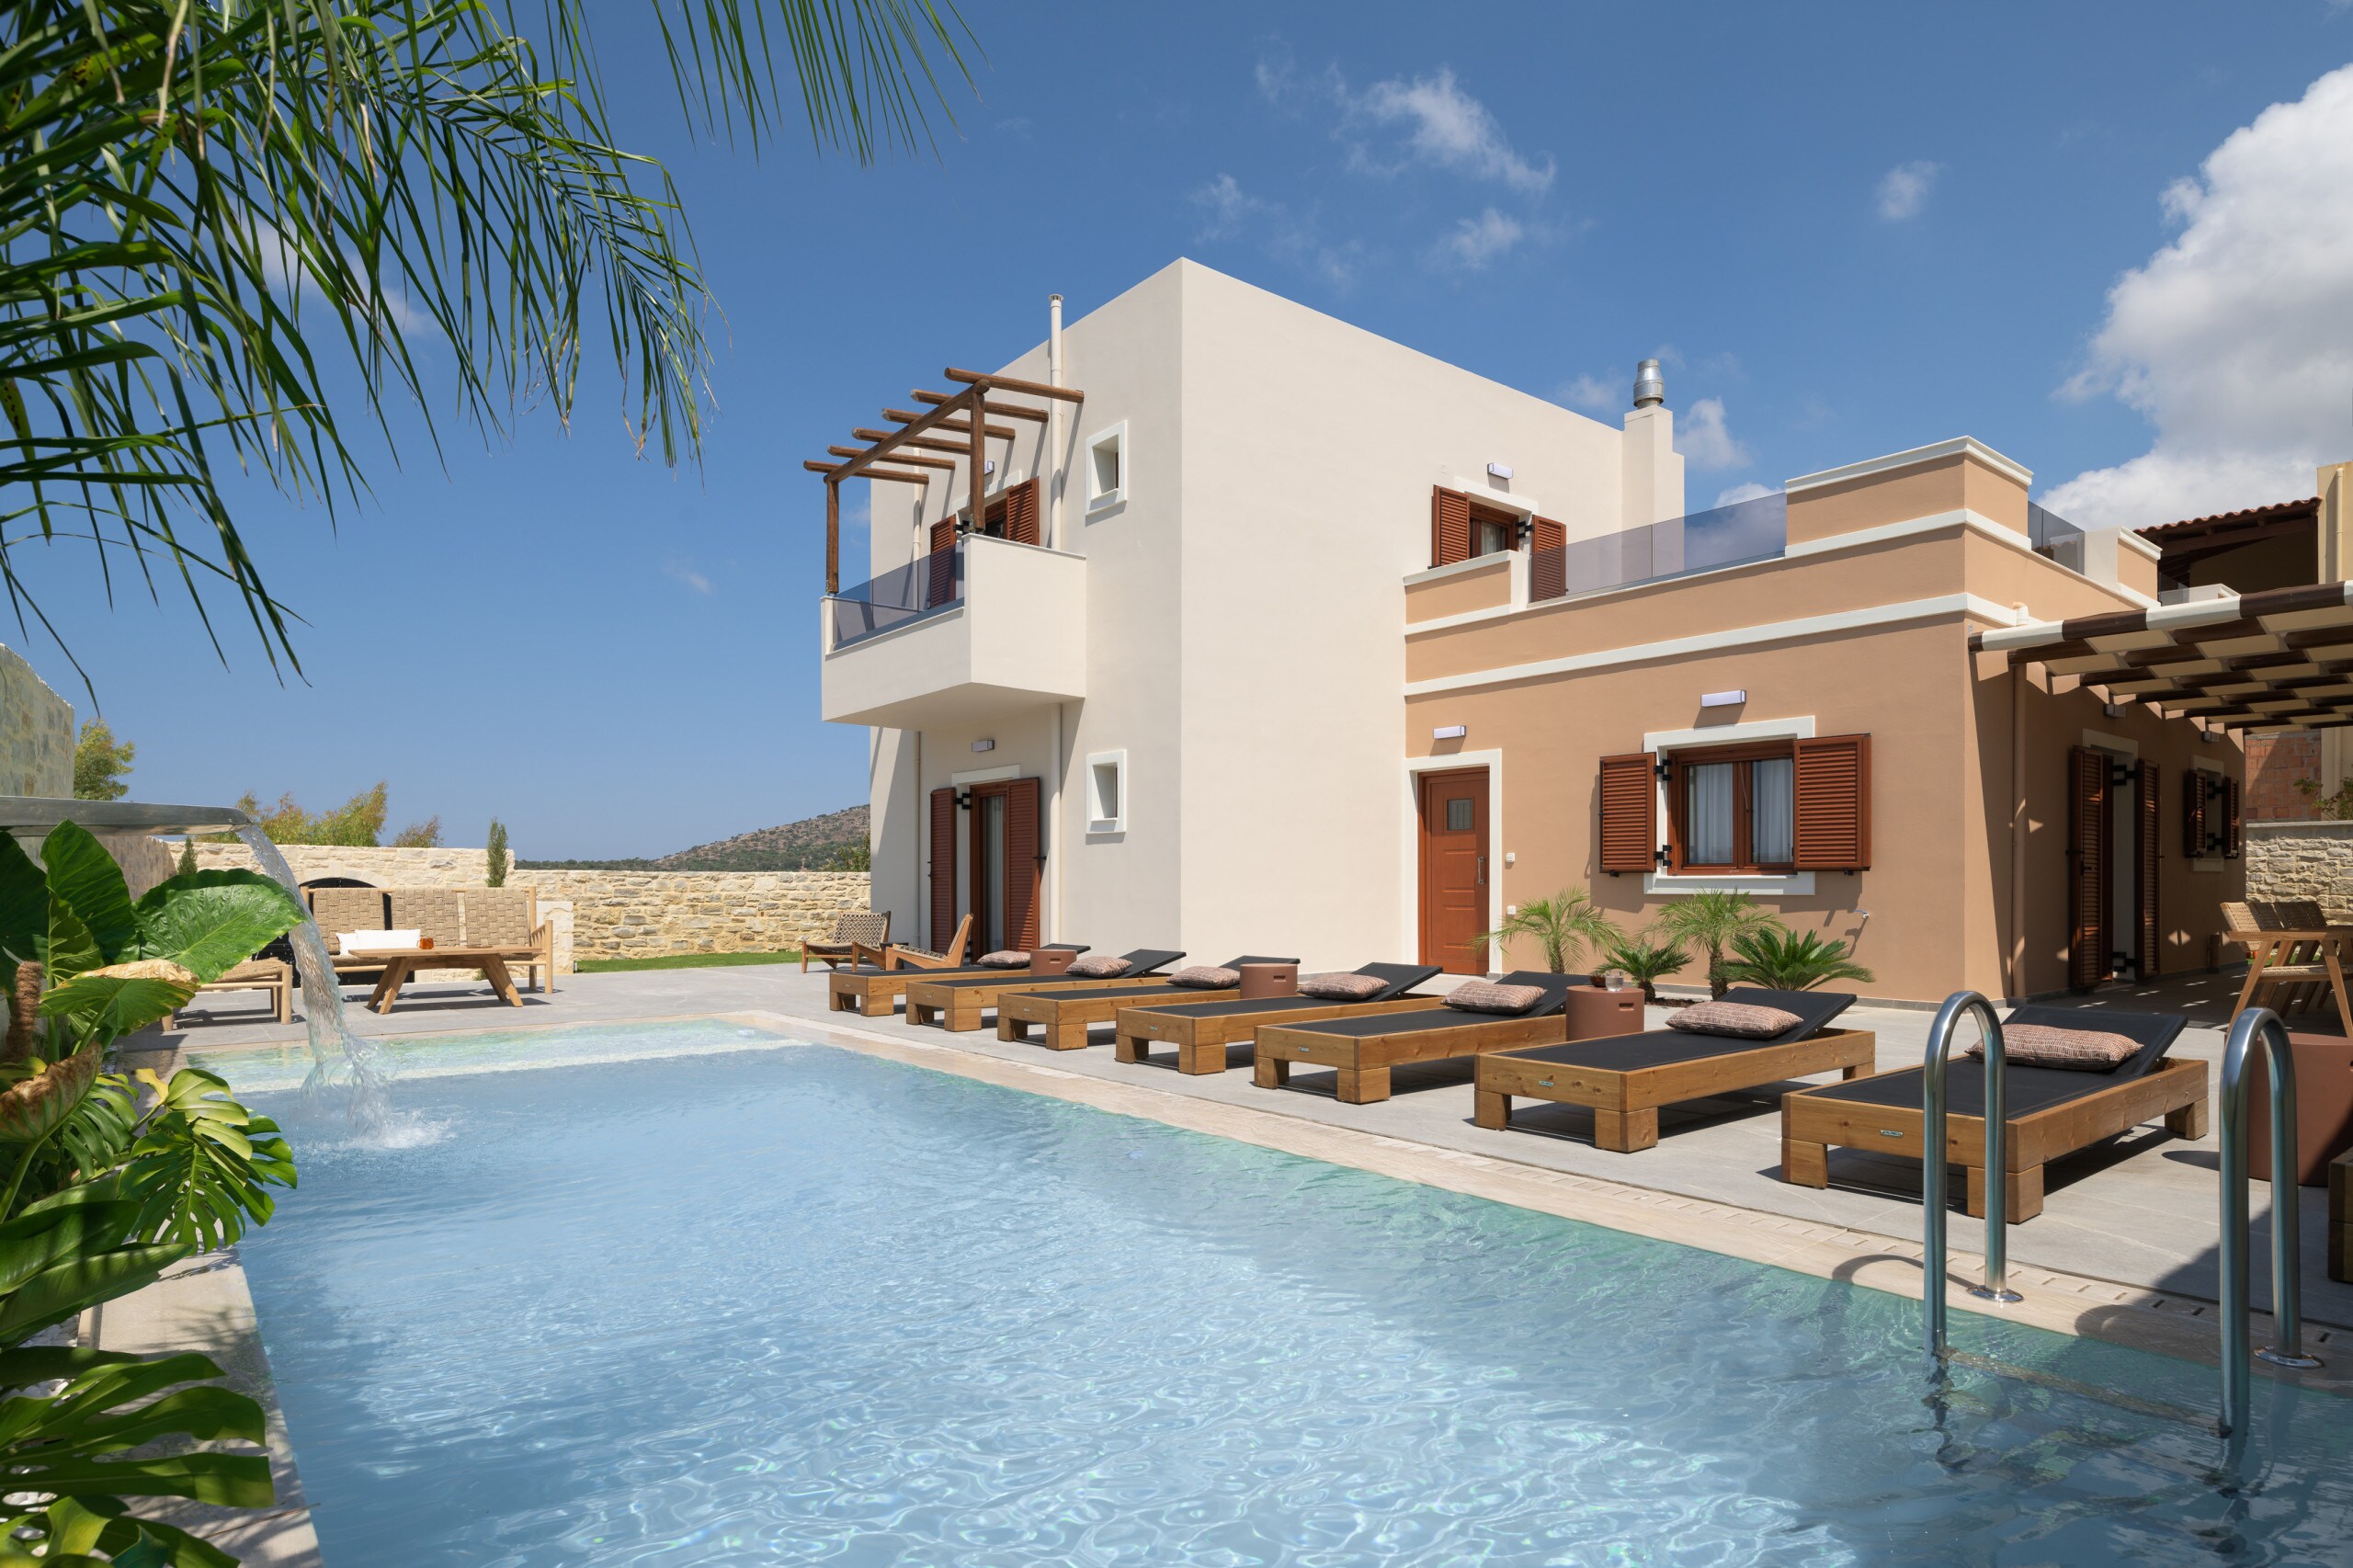 VillaJasmine provides an idyllic setting for luxury self-catering home breaks in Crete.